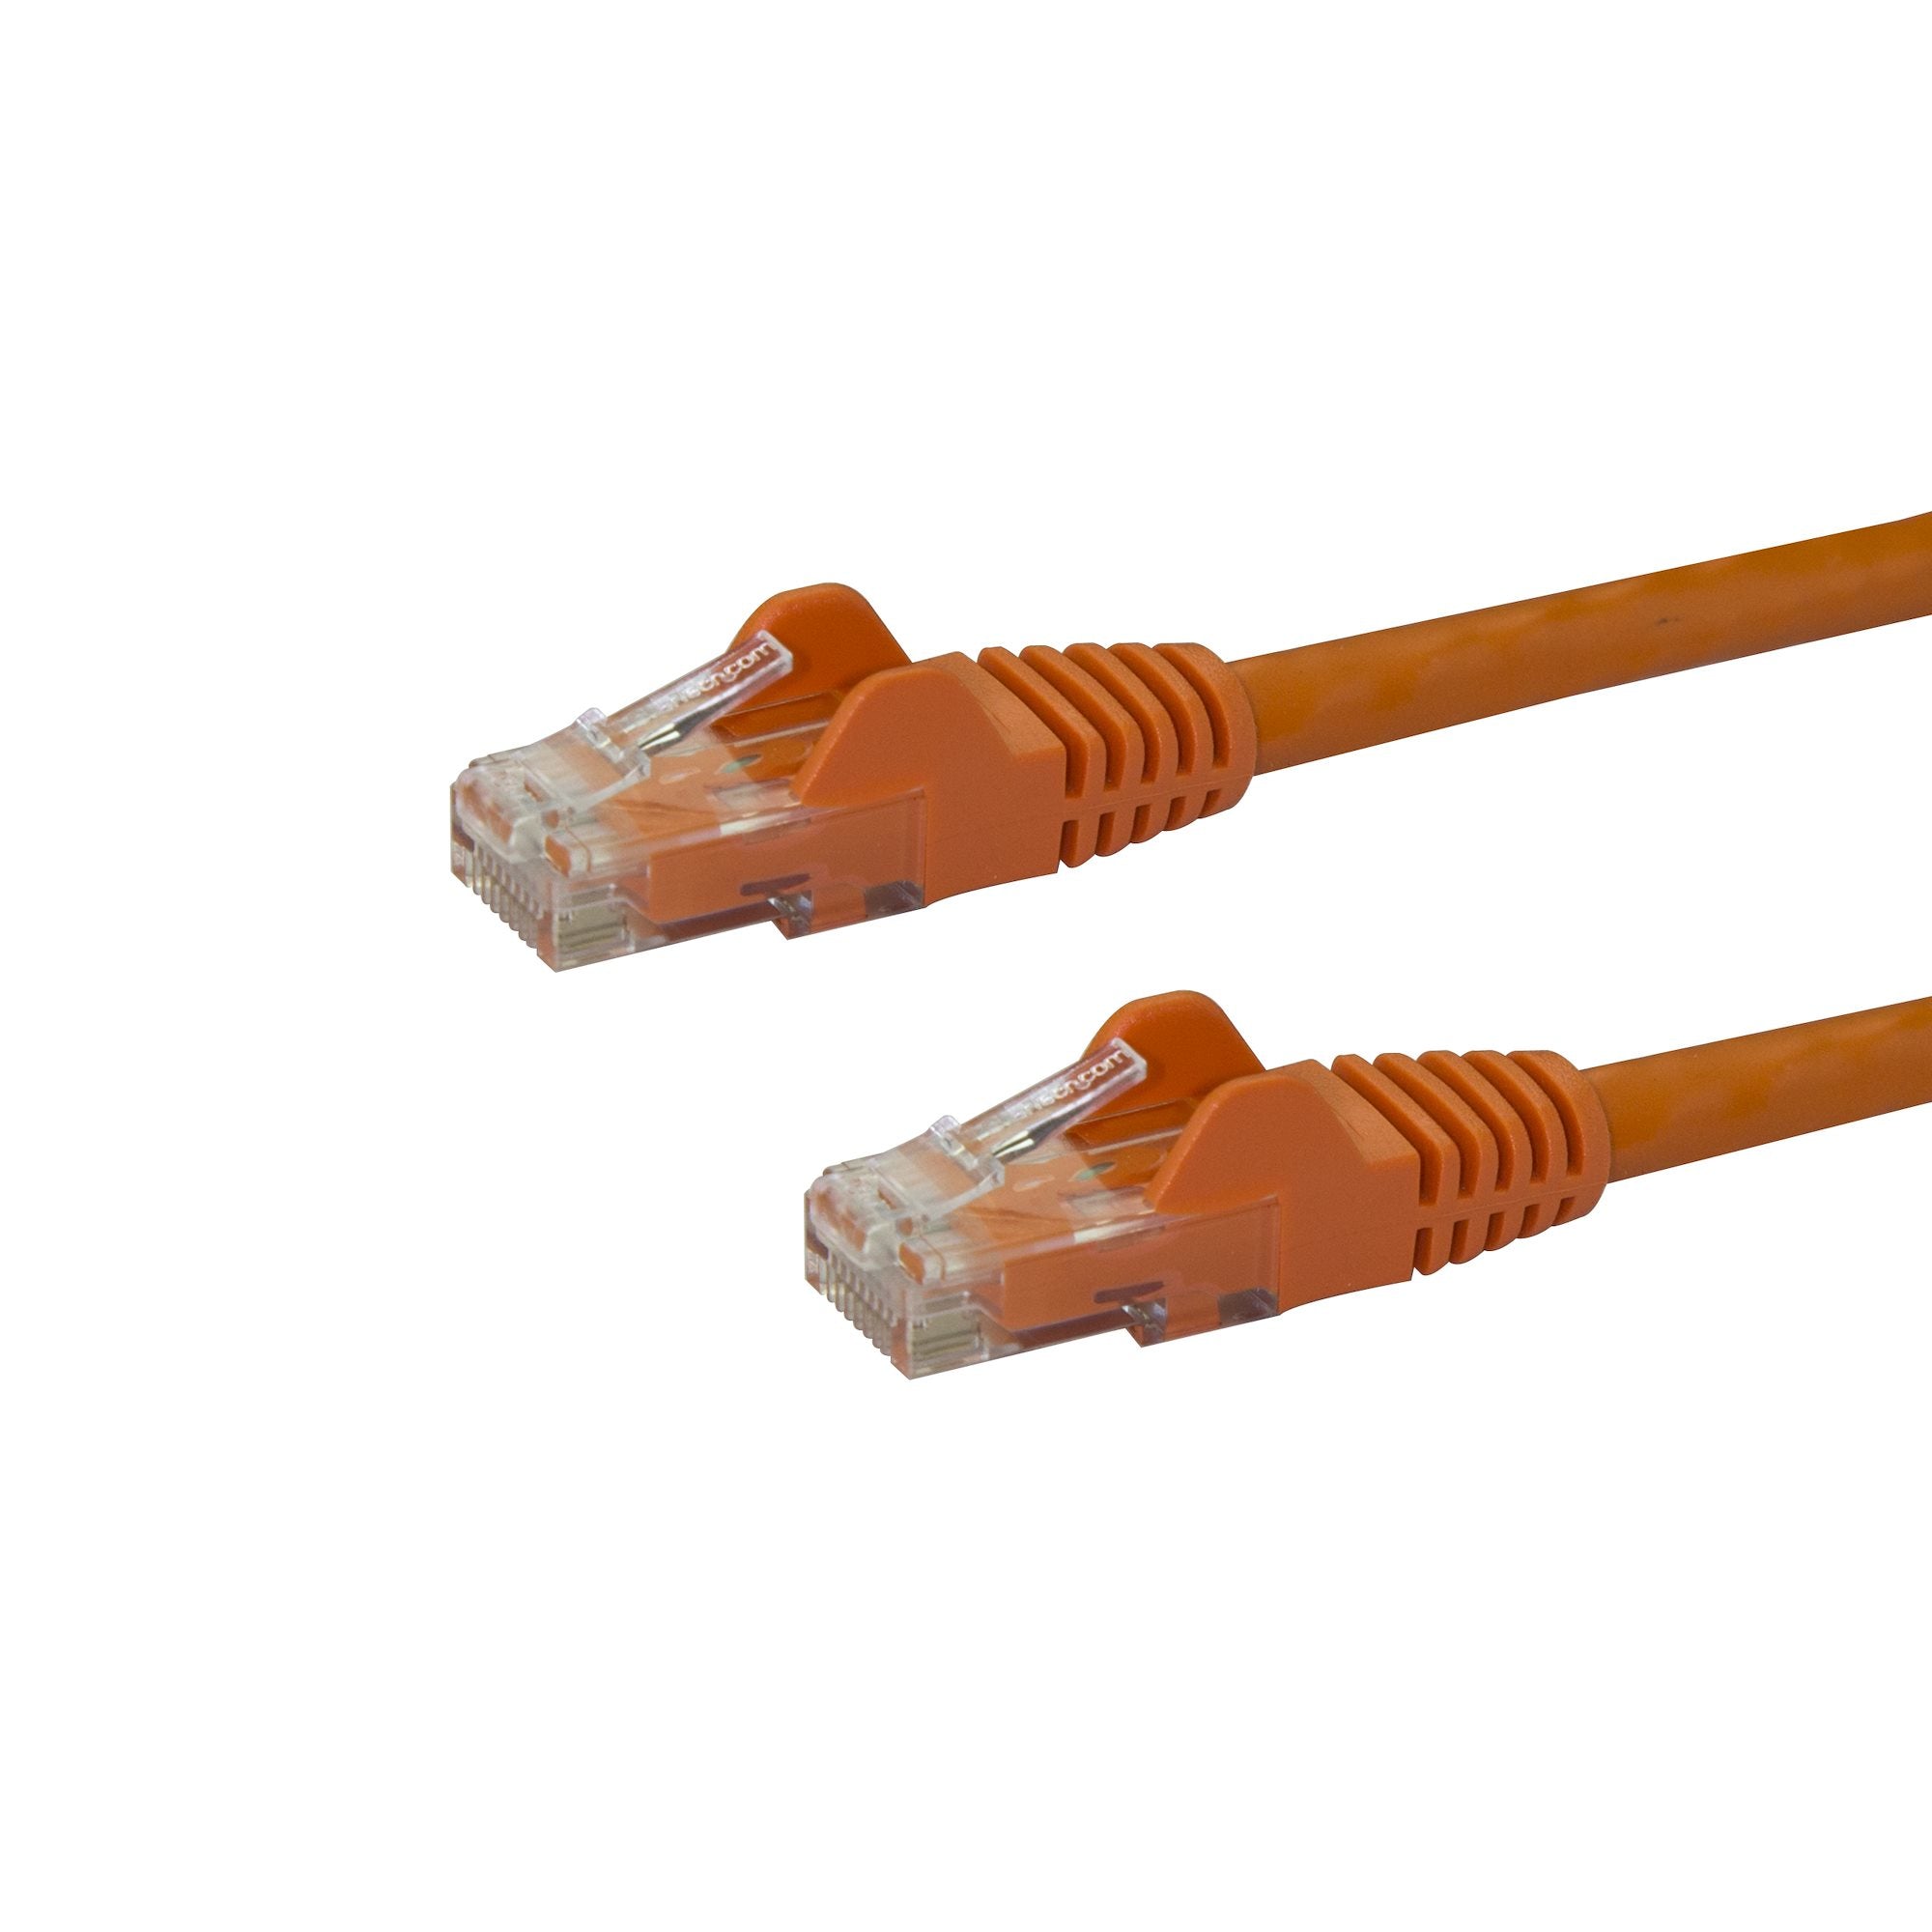 StarTech.com 75ft CAT6 Ethernet Cable - Orange CAT 6 Gigabit Ethernet Wire -650MHz 100W PoE RJ45 UTP Network/Patch Cord Snagless w/Strain Relief Fluke Tested/Wiring is UL Certified/TIA